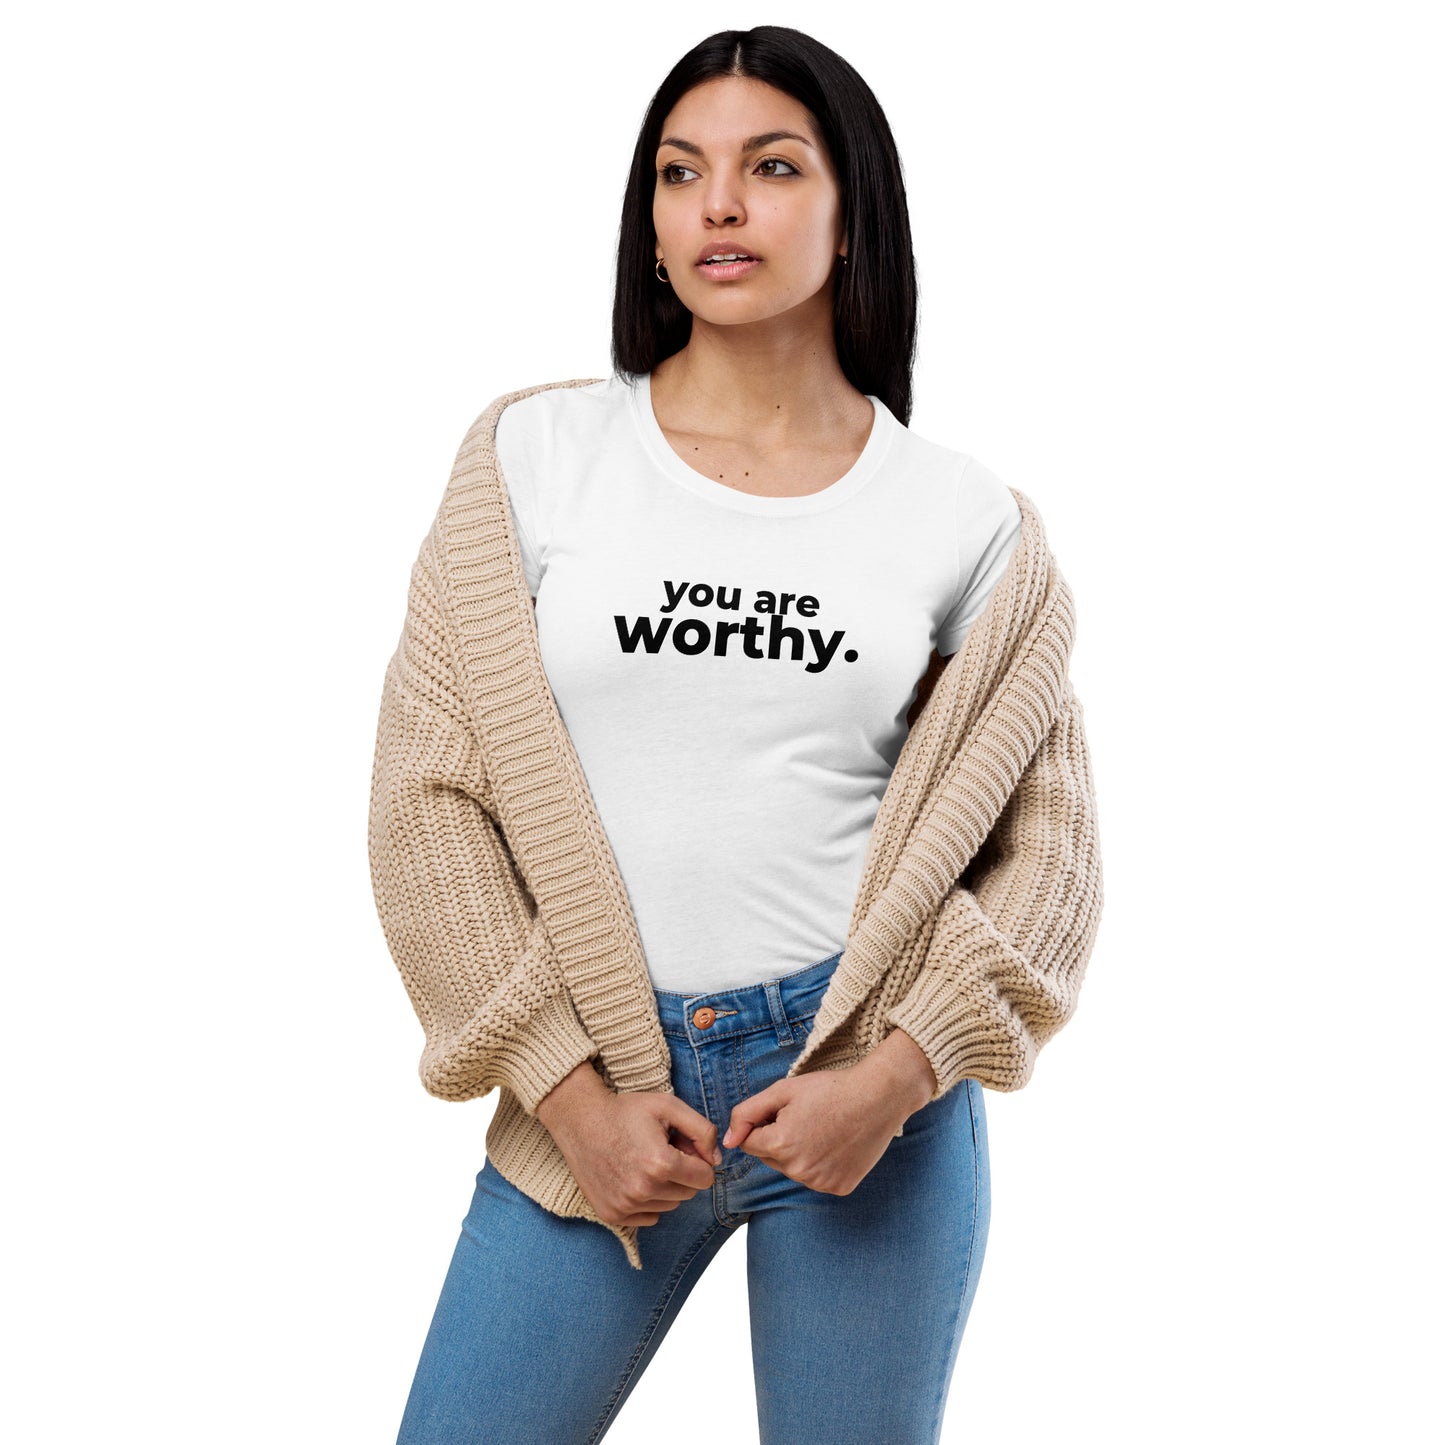 YOU ARE WORTHY - Women’s fitted t-shirt